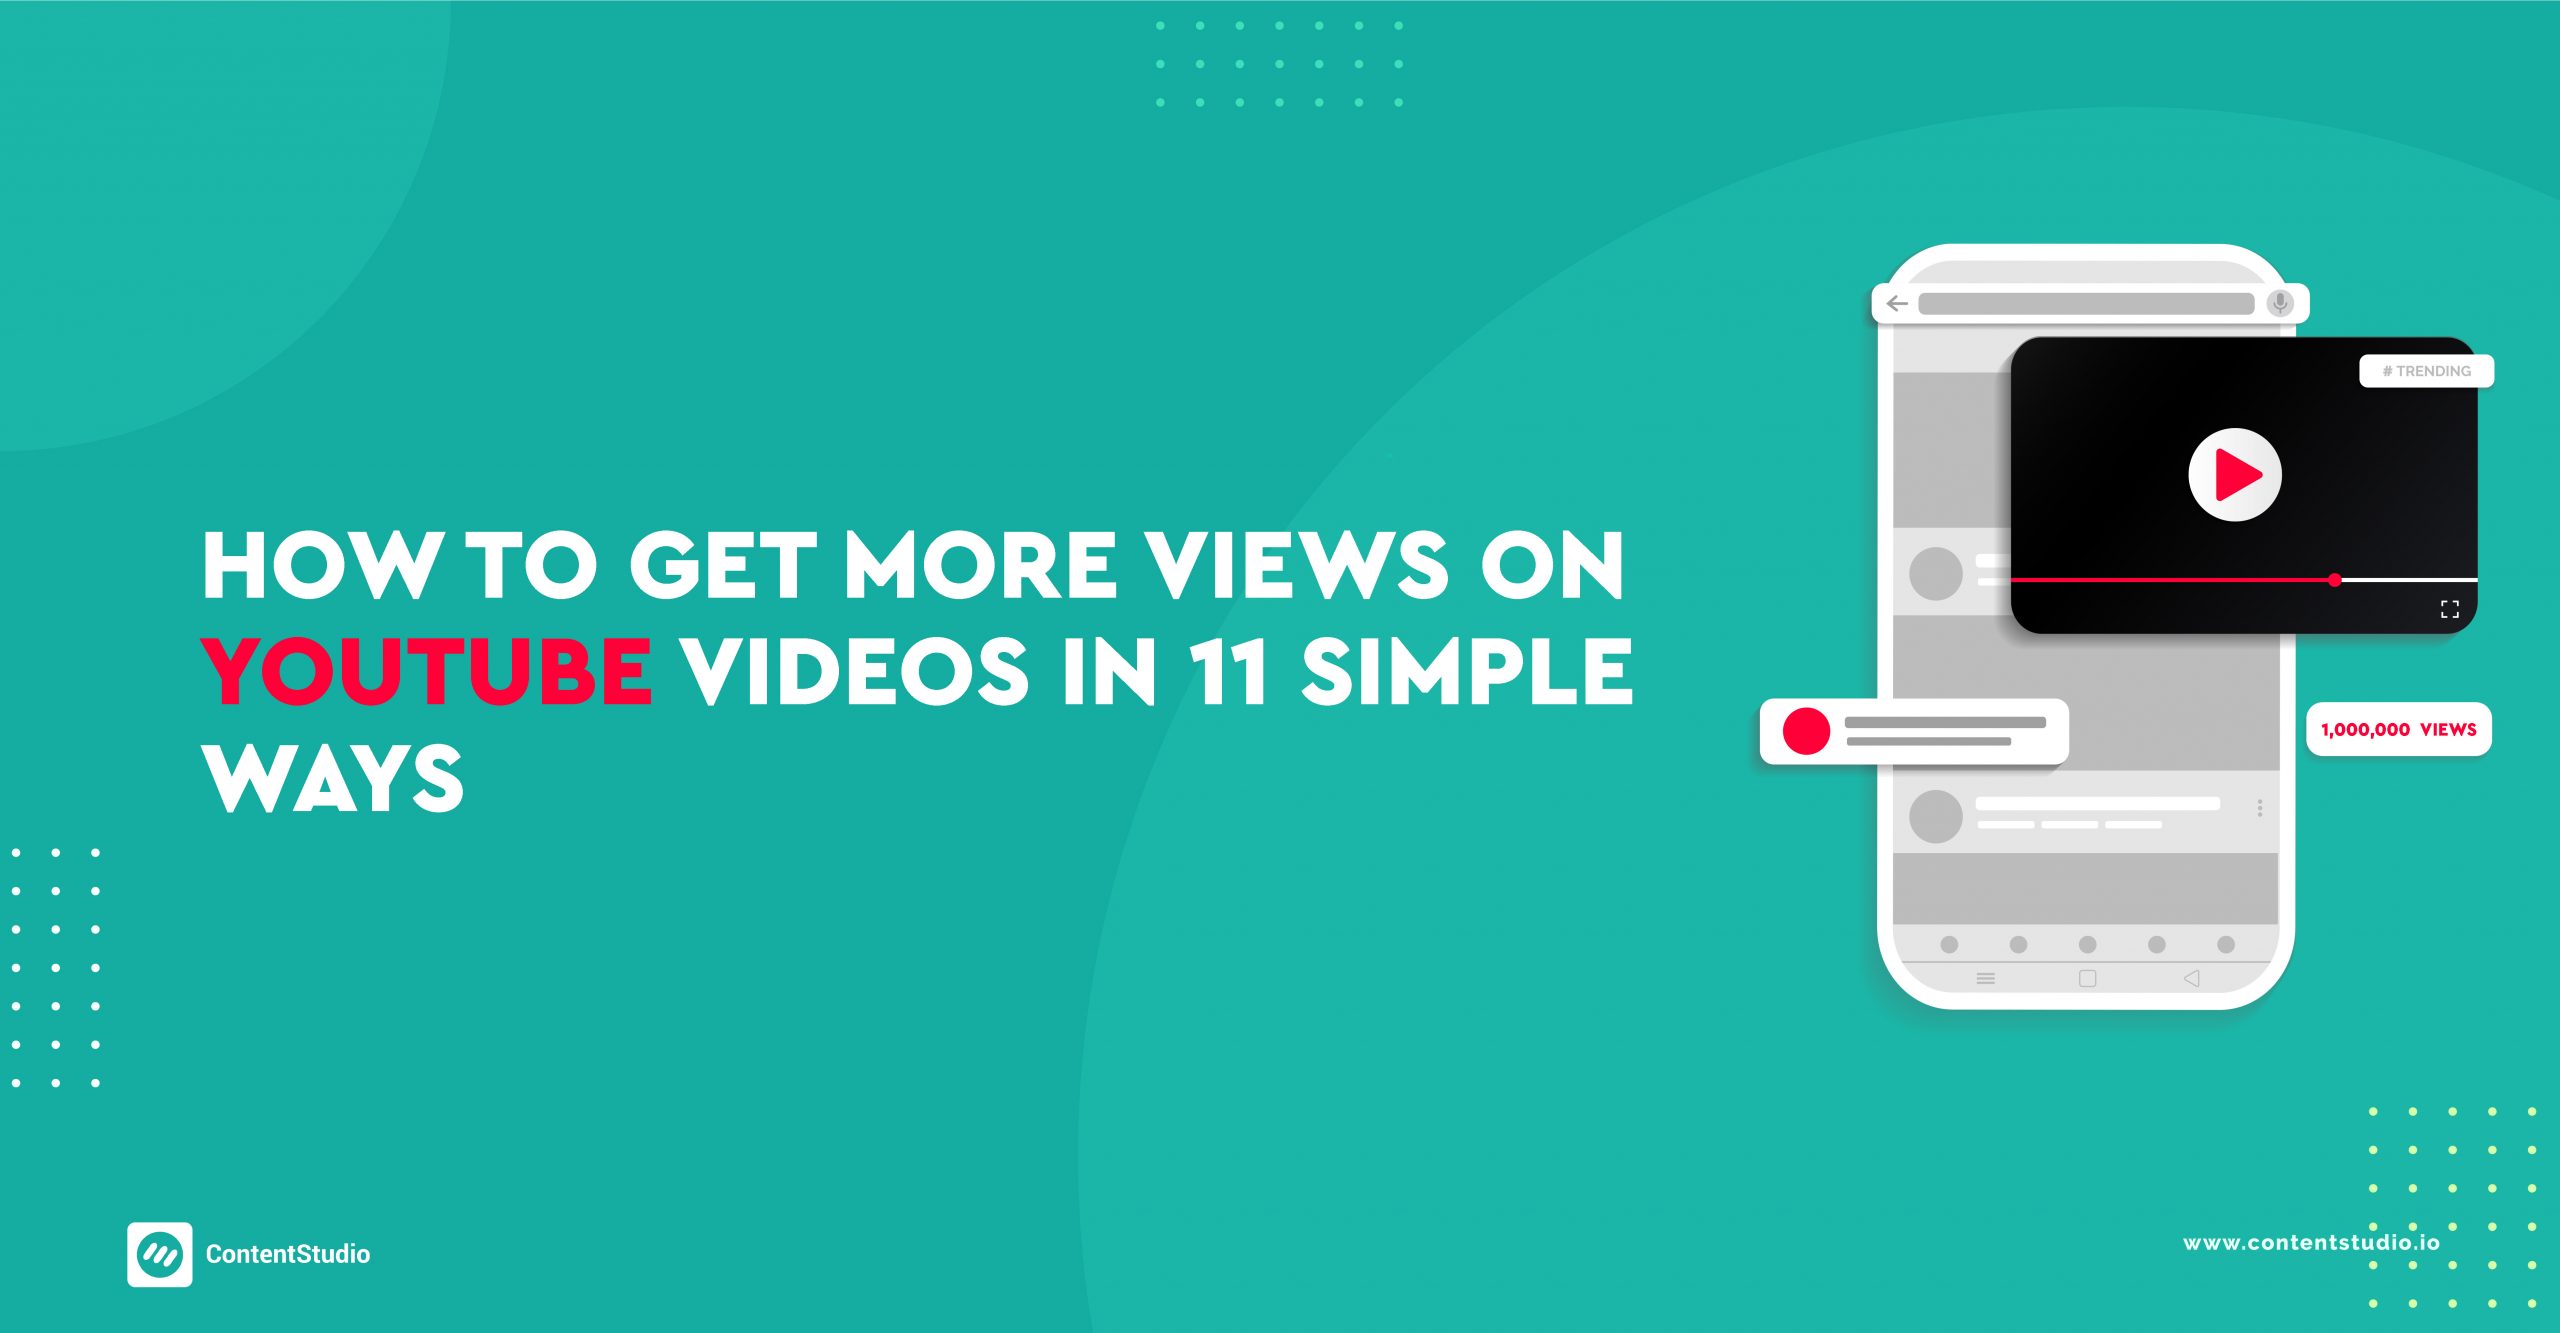 How to get more views on YouTube videos in 11 simple ways